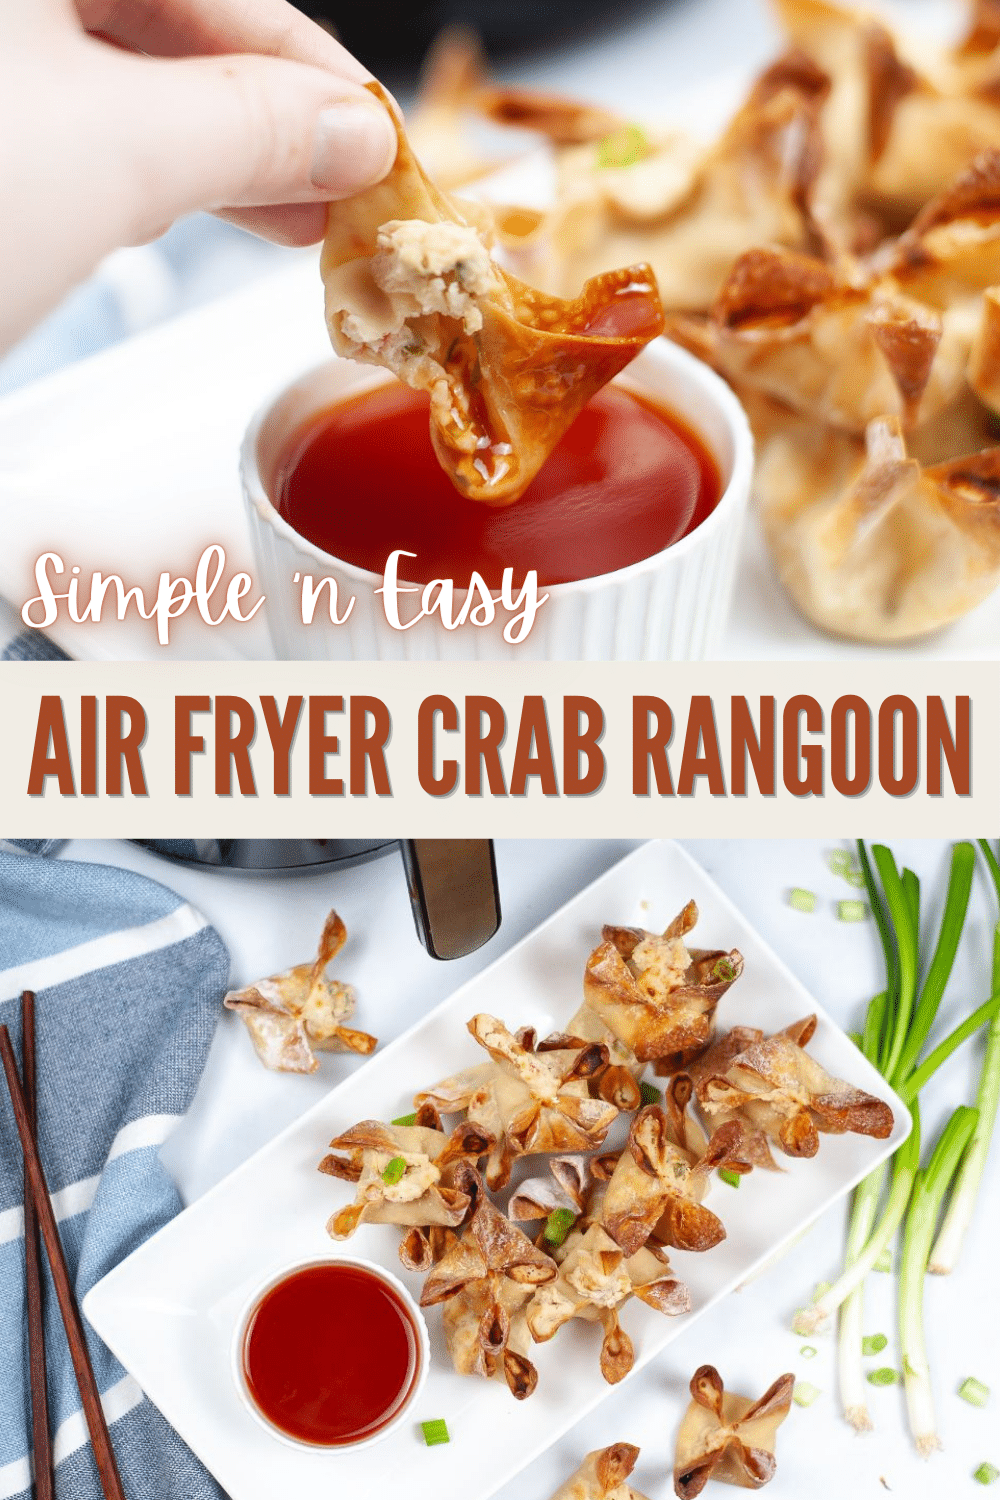 a collage of 2 images of Air Fryer Crab Rangoon, top part shows a piece being dipped in a red sauce, bottom part shows a top view of the Air Fryer Crab Rangoon on a plate with red dipping sauce